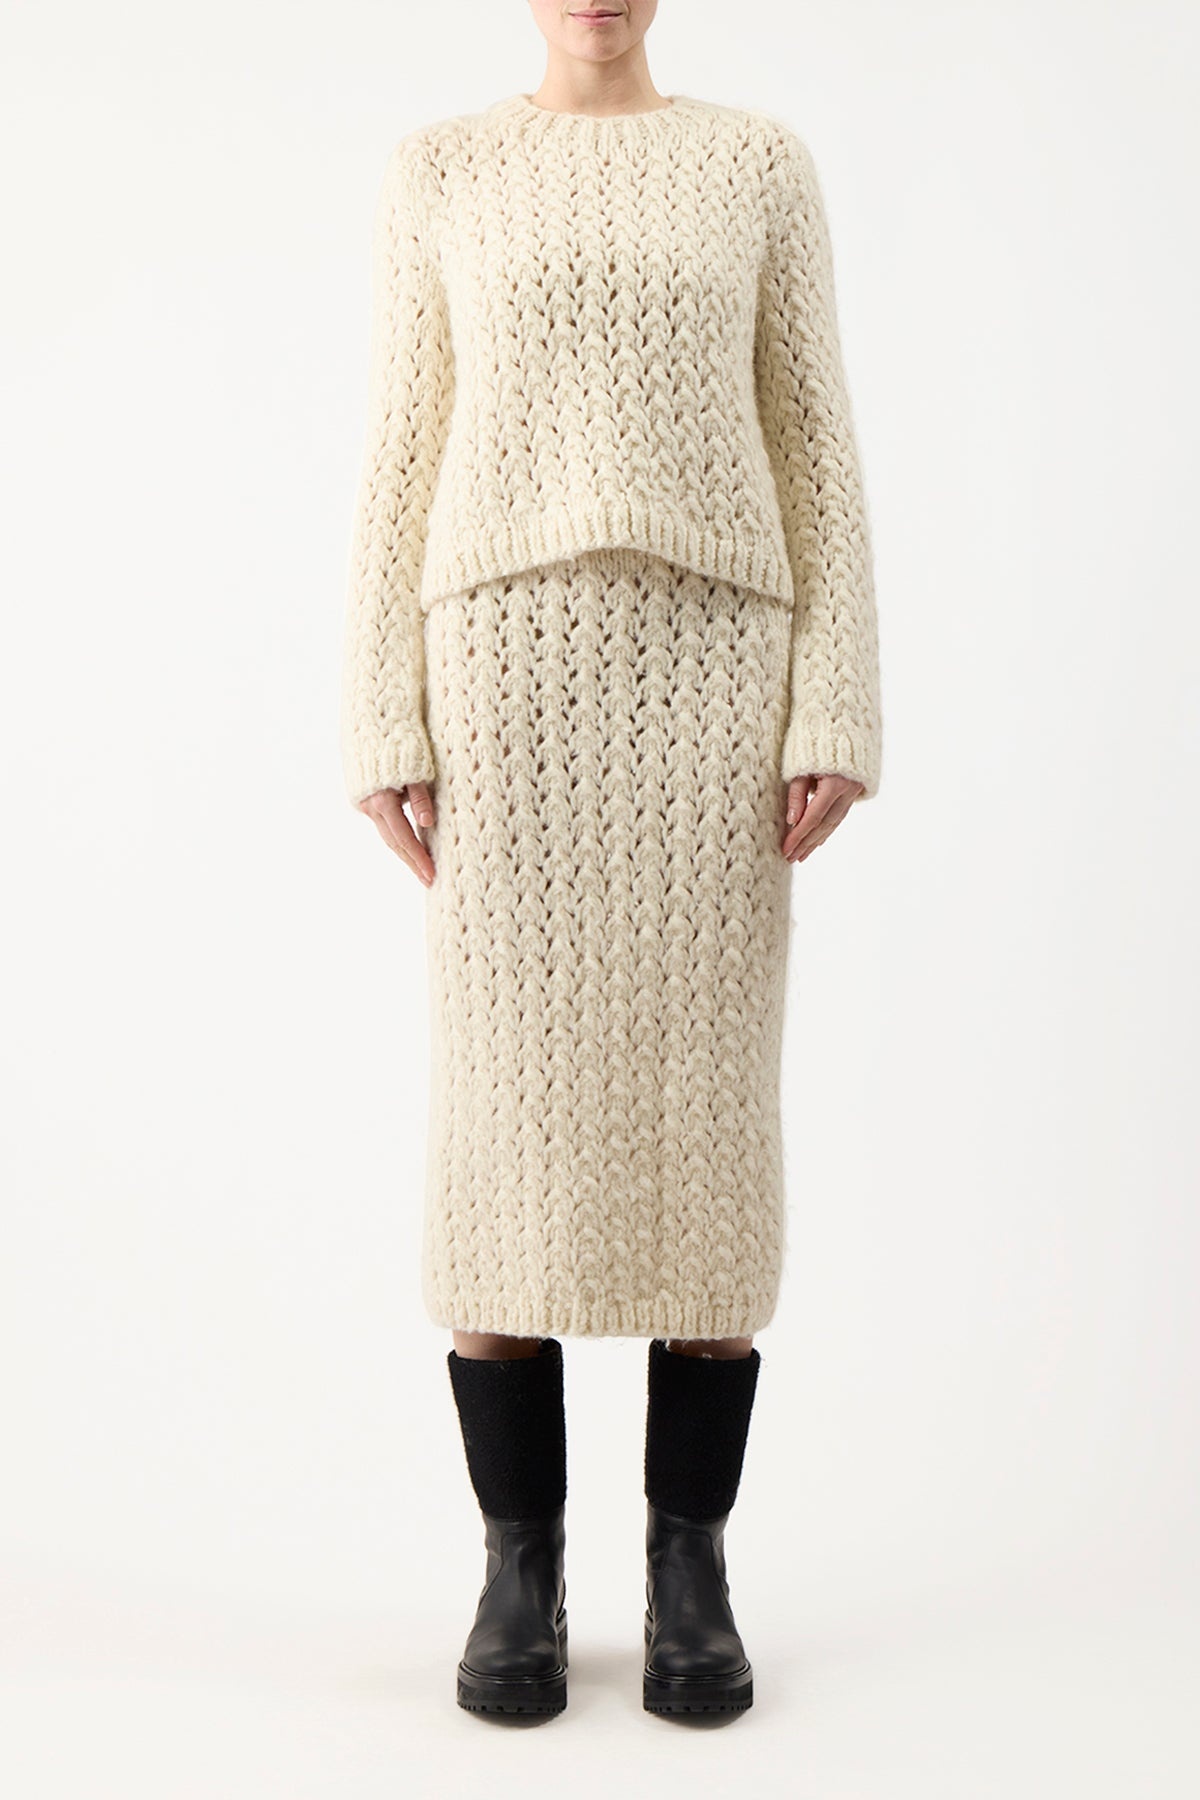 Collin Skirt in Ivory Welfat Cashmere - 2